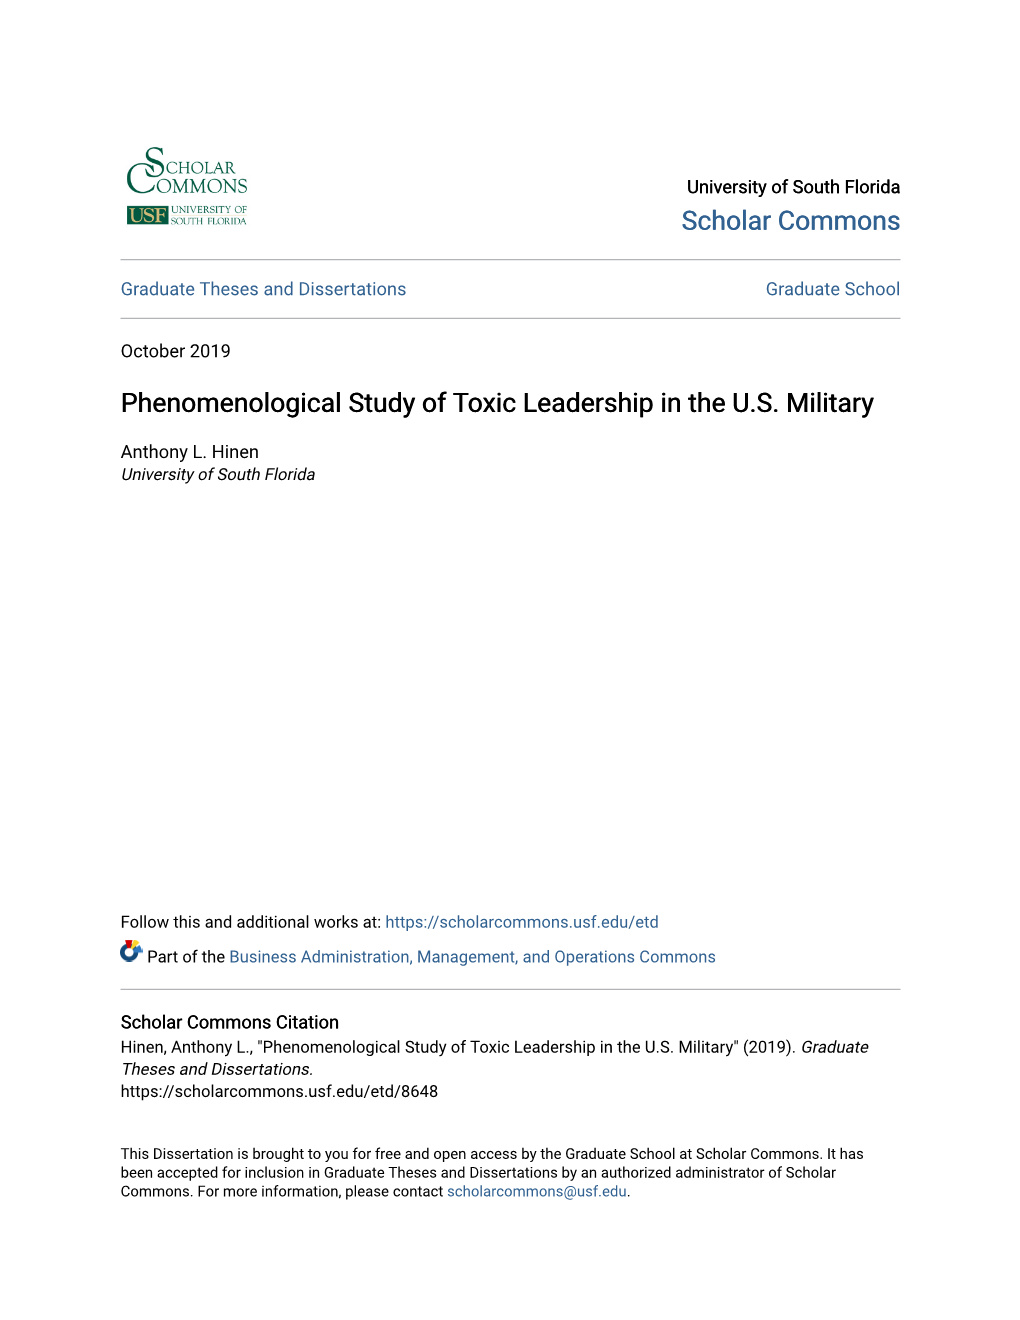 Phenomenological Study of Toxic Leadership in the U.S. Military